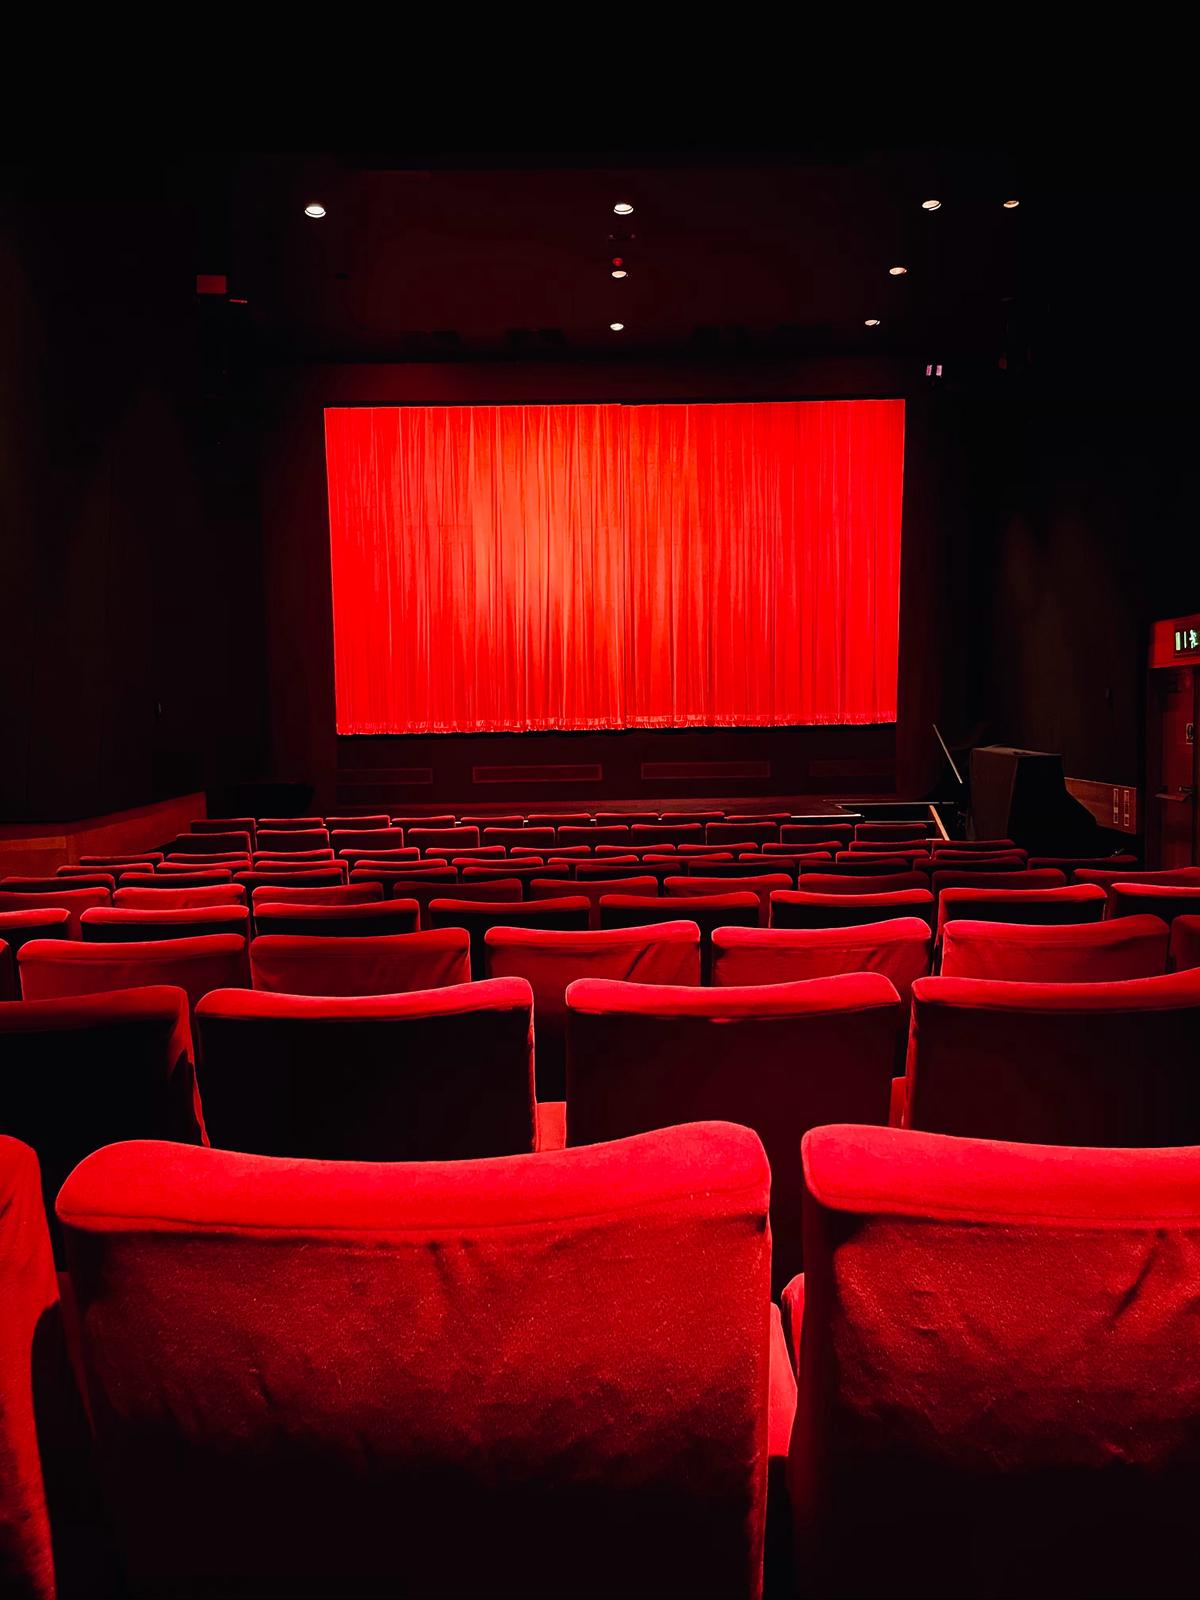 Illustration of Dolby Atmos cinema system with speakers placed all around the room